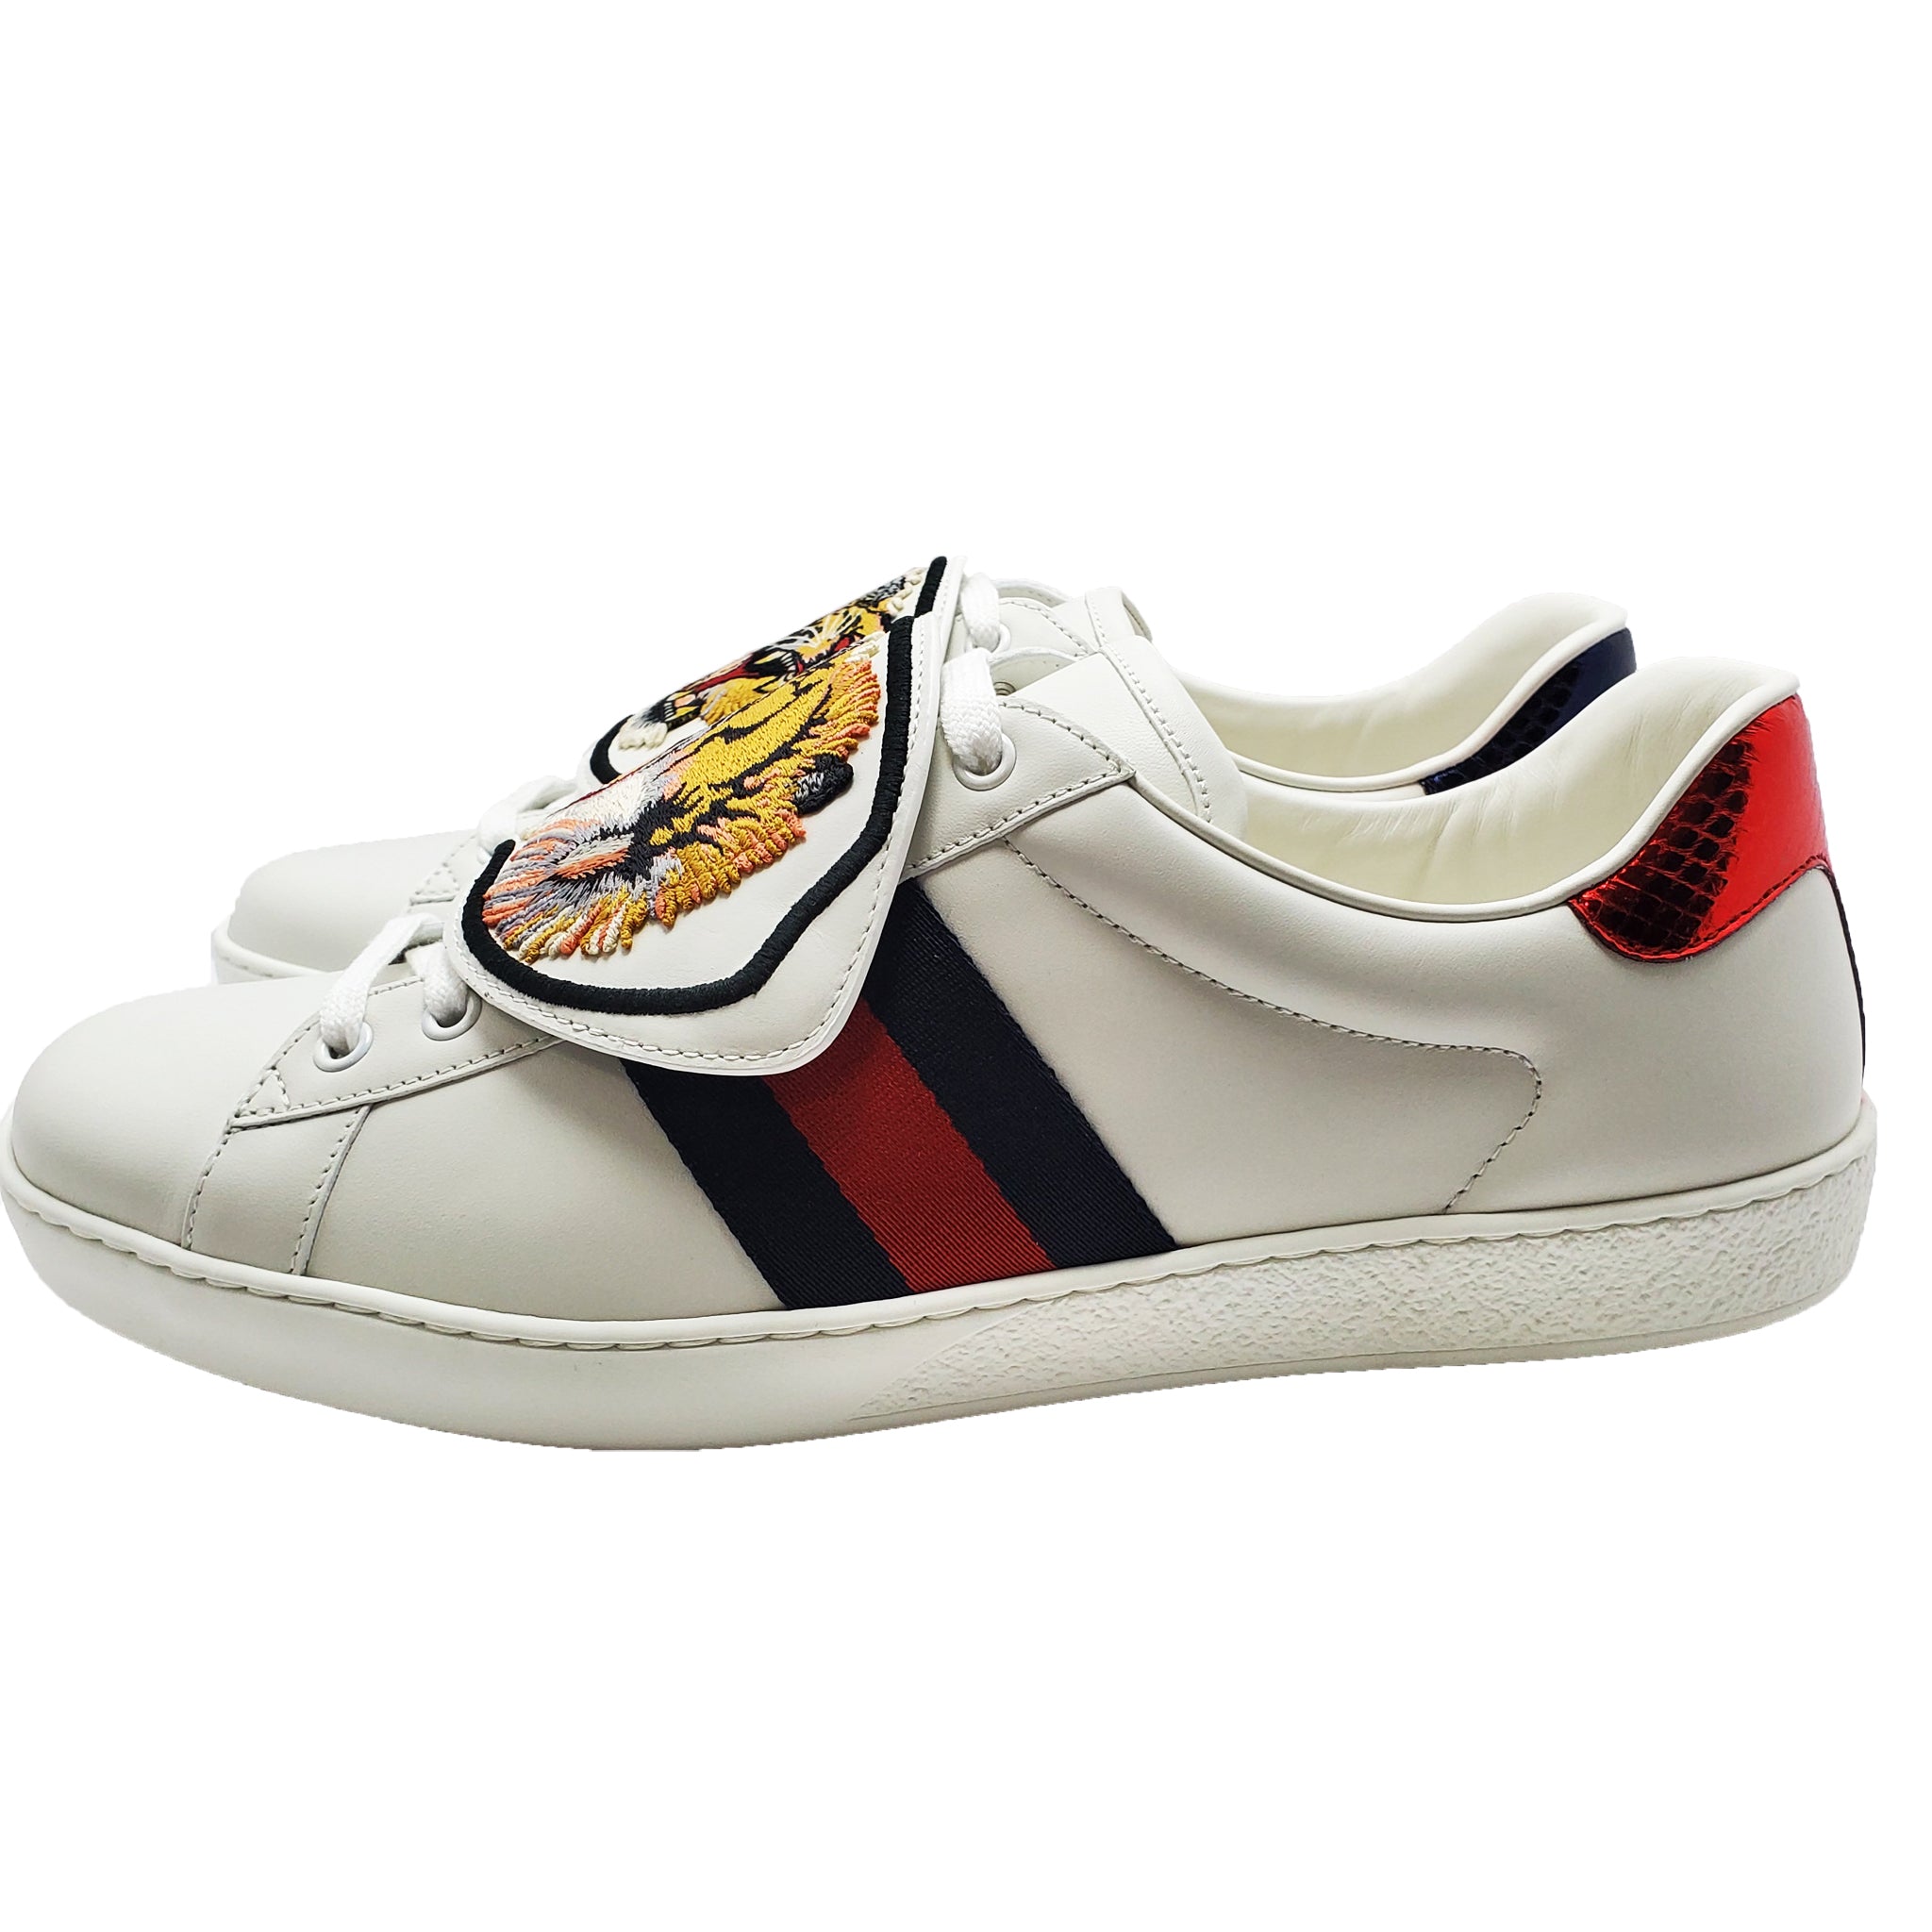 gucci sneaker patches